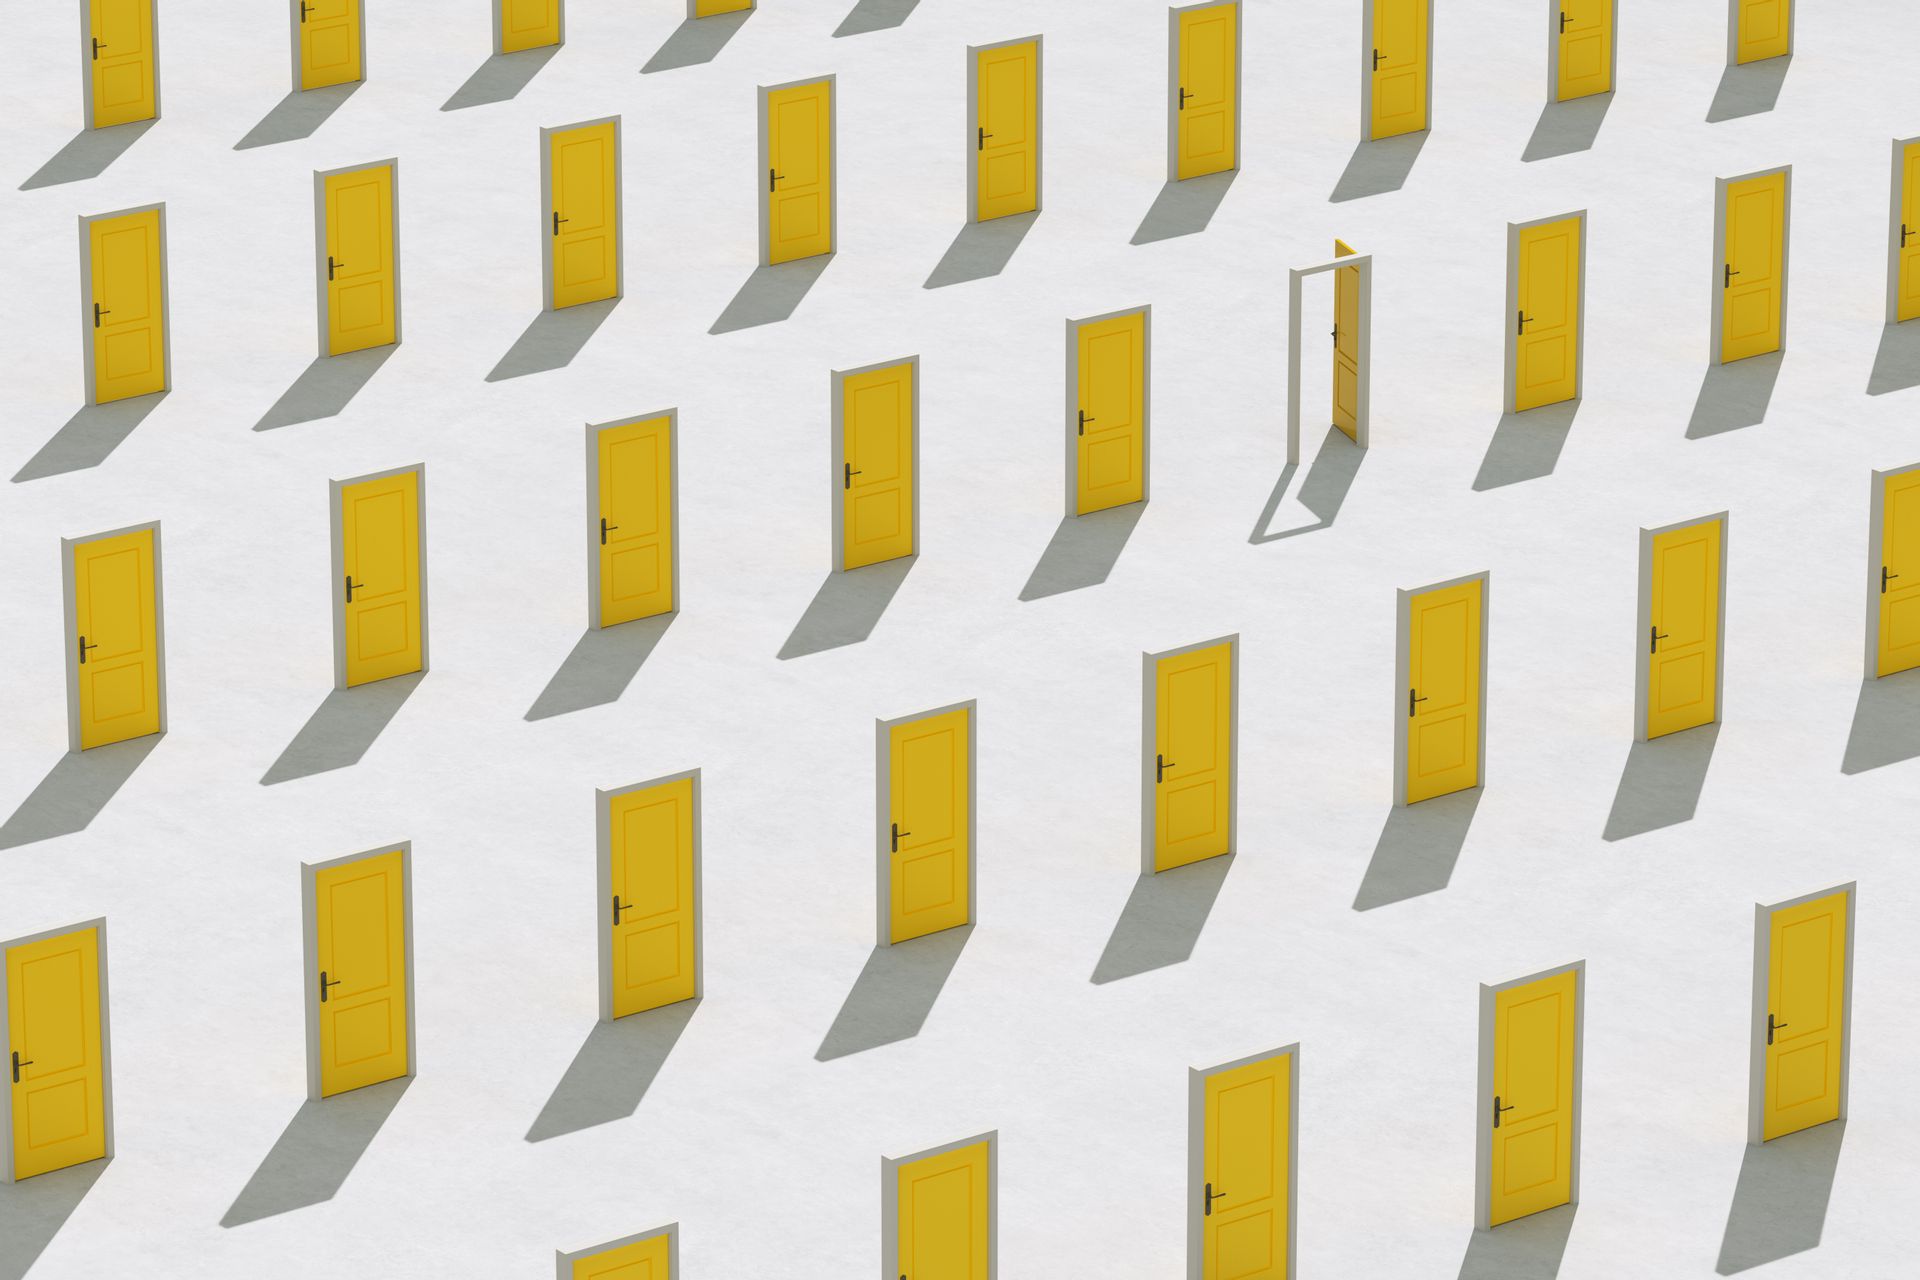 Several rows of freestanding yellow doors, with one open, to represent decision-making